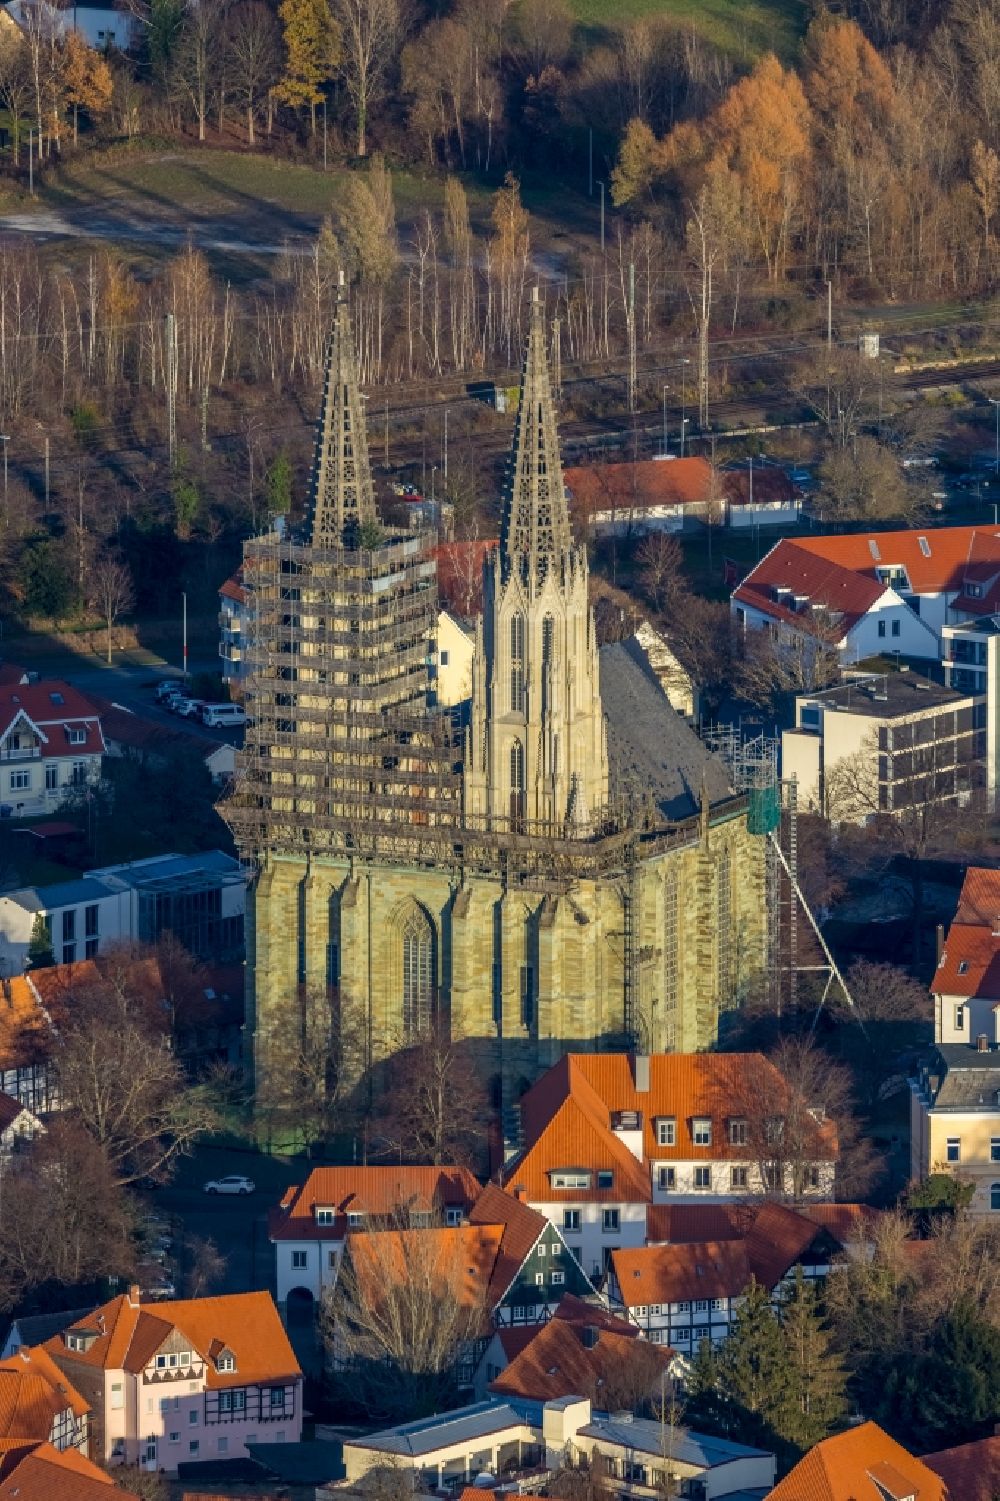 Aerial photograph Soest - Construction site for renovation at the church building of the Sankt Maria zur Wiese in Soest in the federal state of North Rhine-Westphalia, Germany